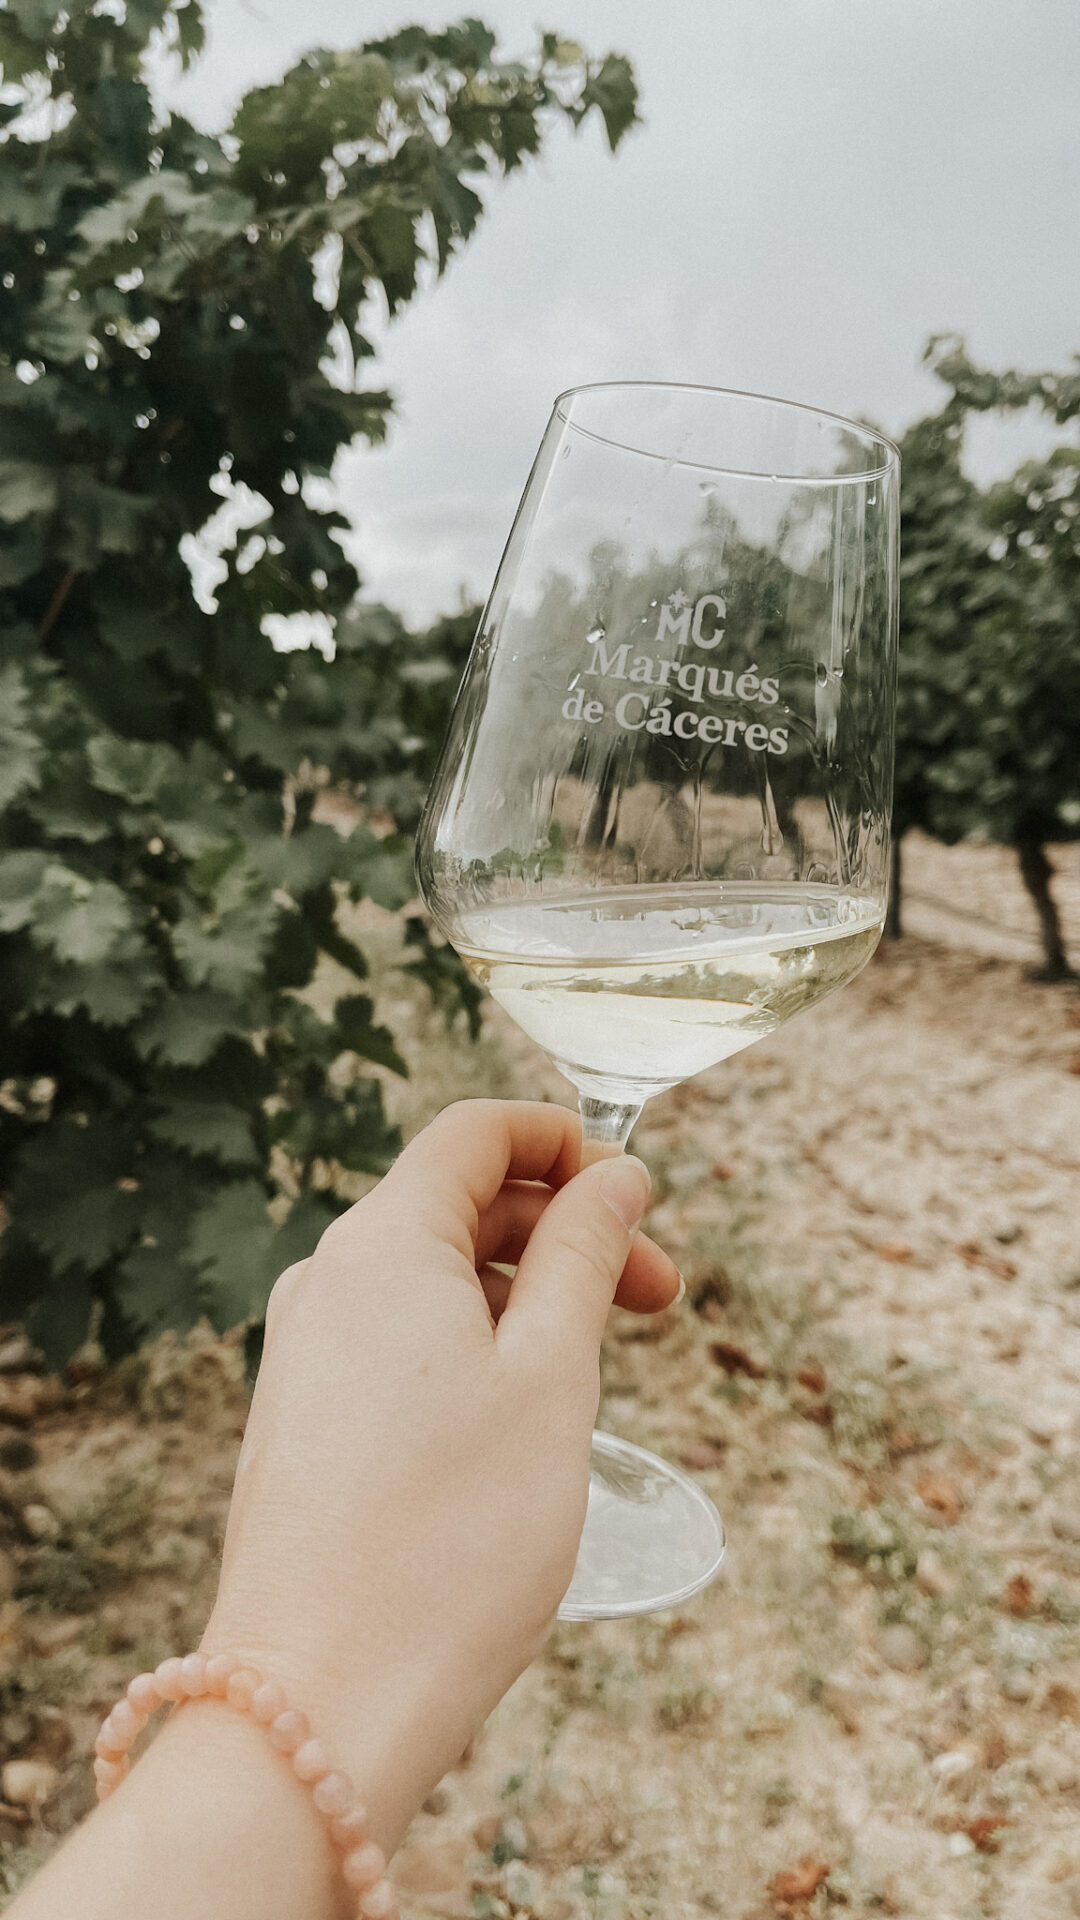 Marques de caceres spanish white wine in a glass in a vineyard